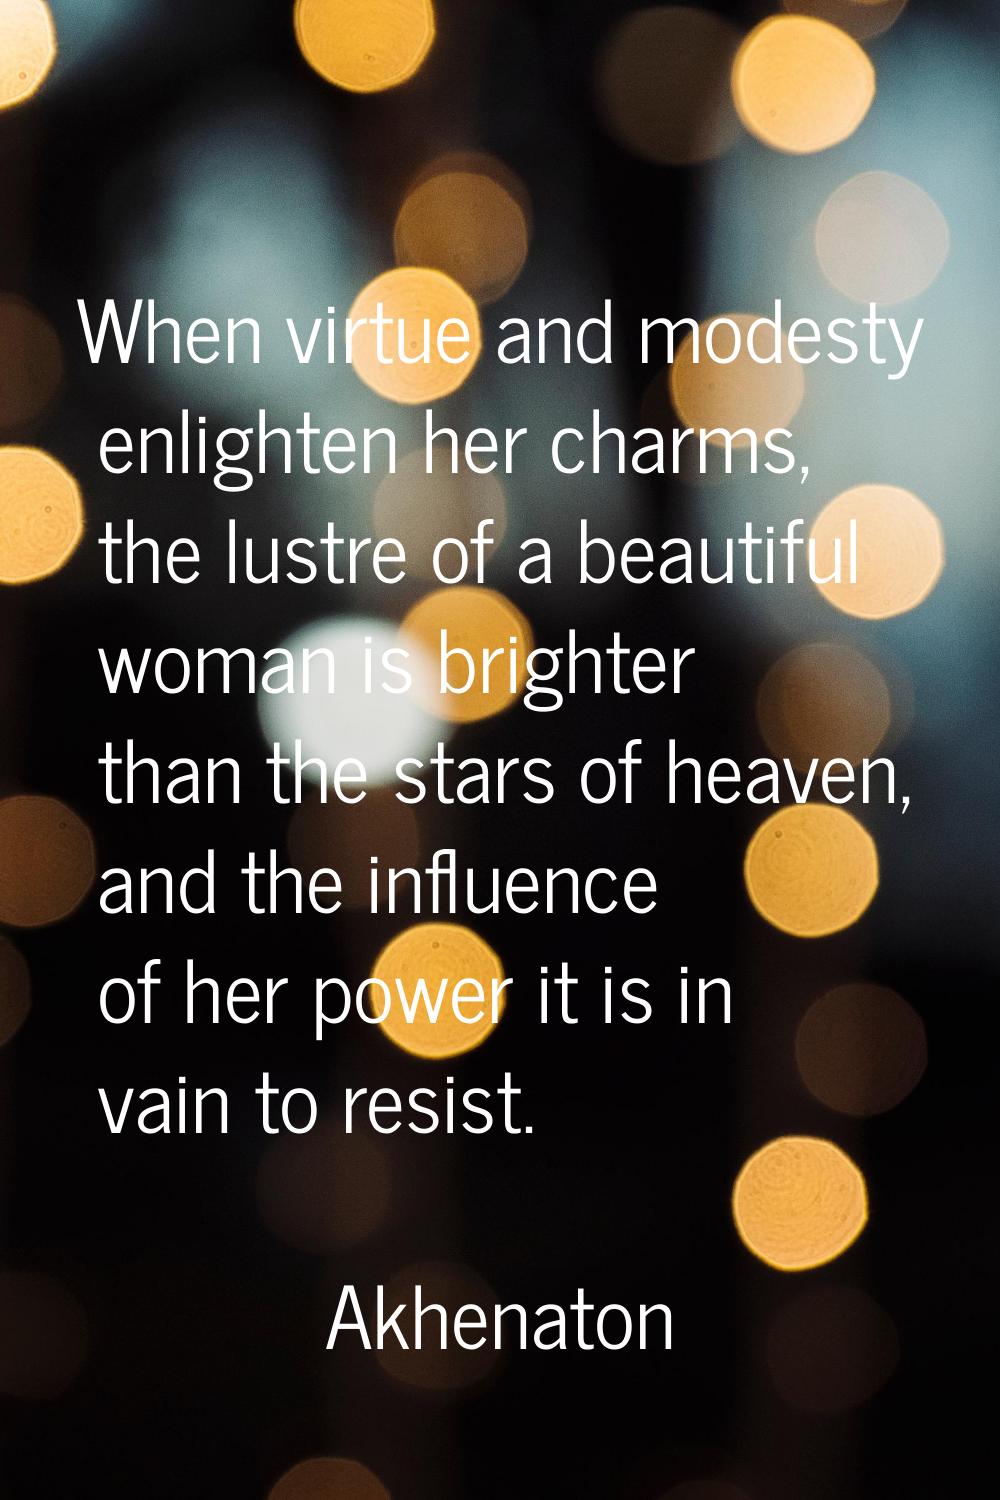 When virtue and modesty enlighten her charms, the lustre of a beautiful woman is brighter than the 